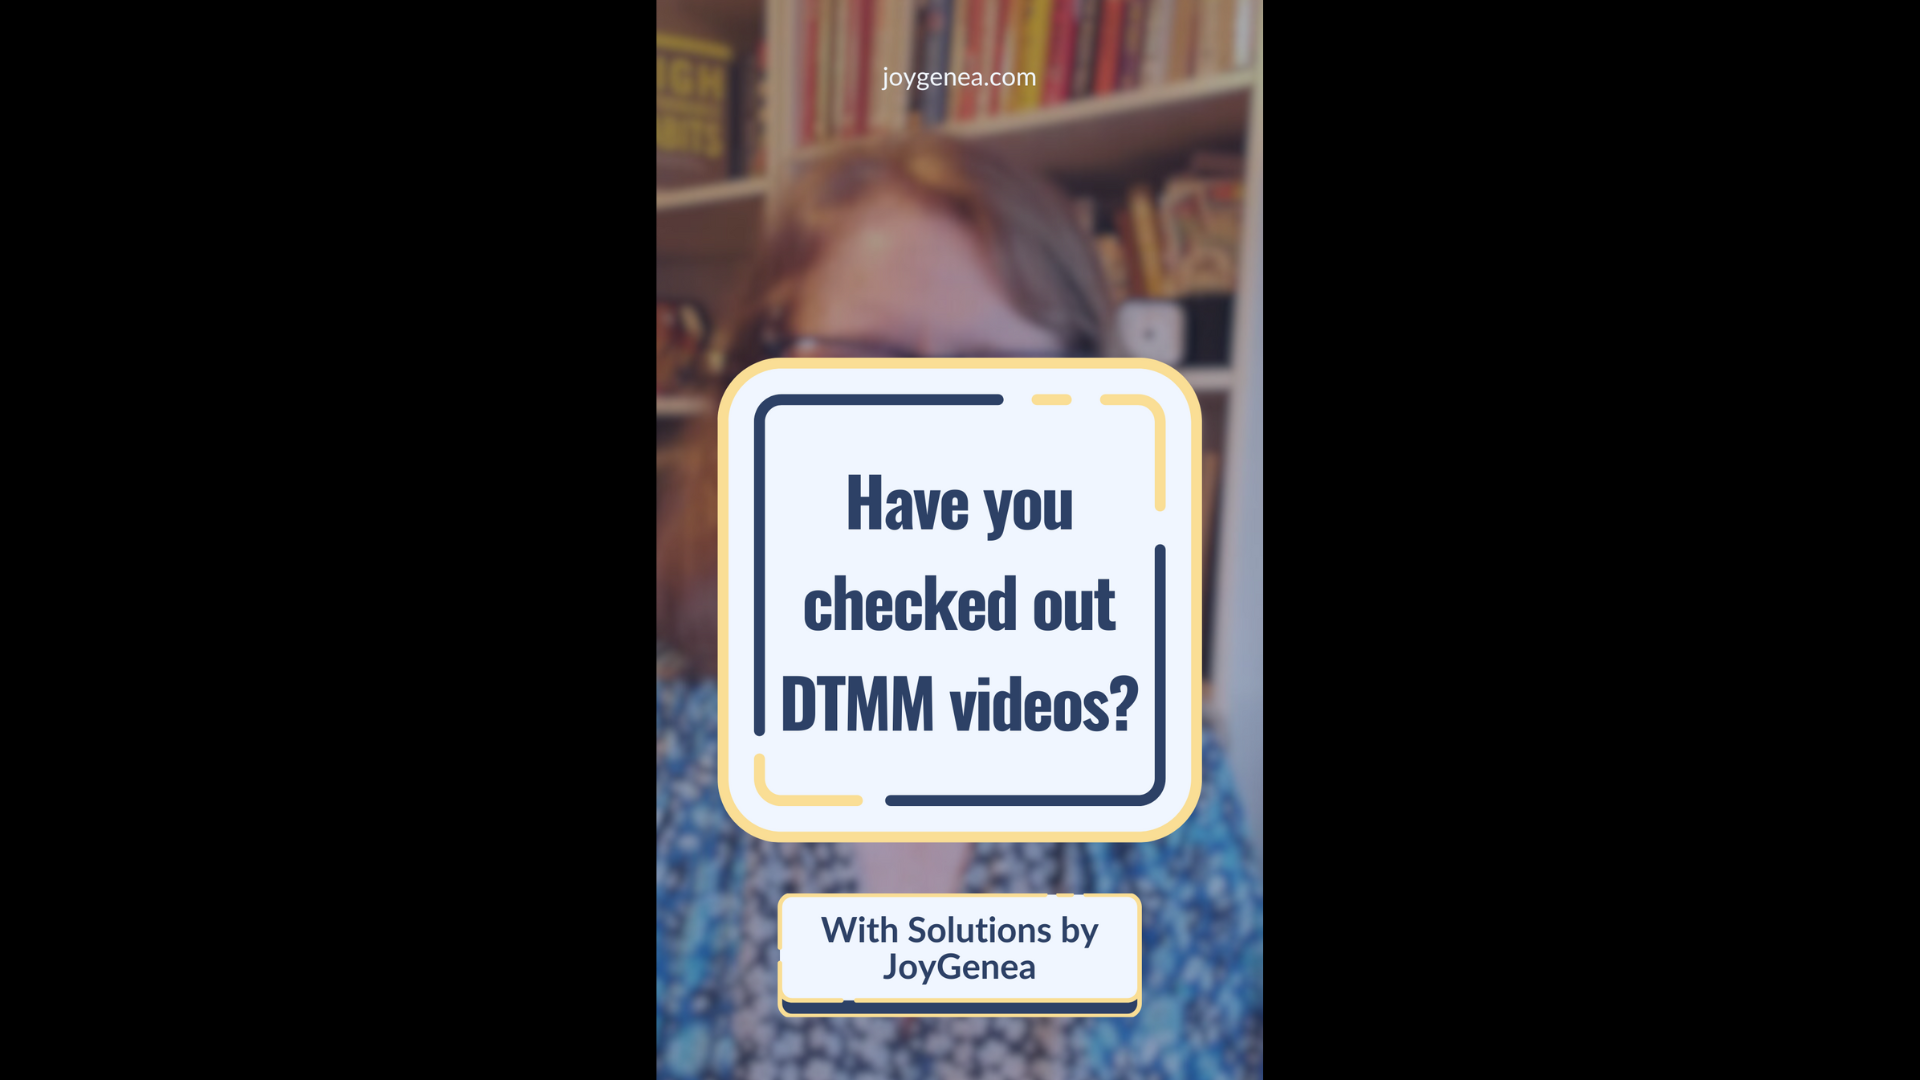 Featured image for “Have you checked out DTMM videos?”